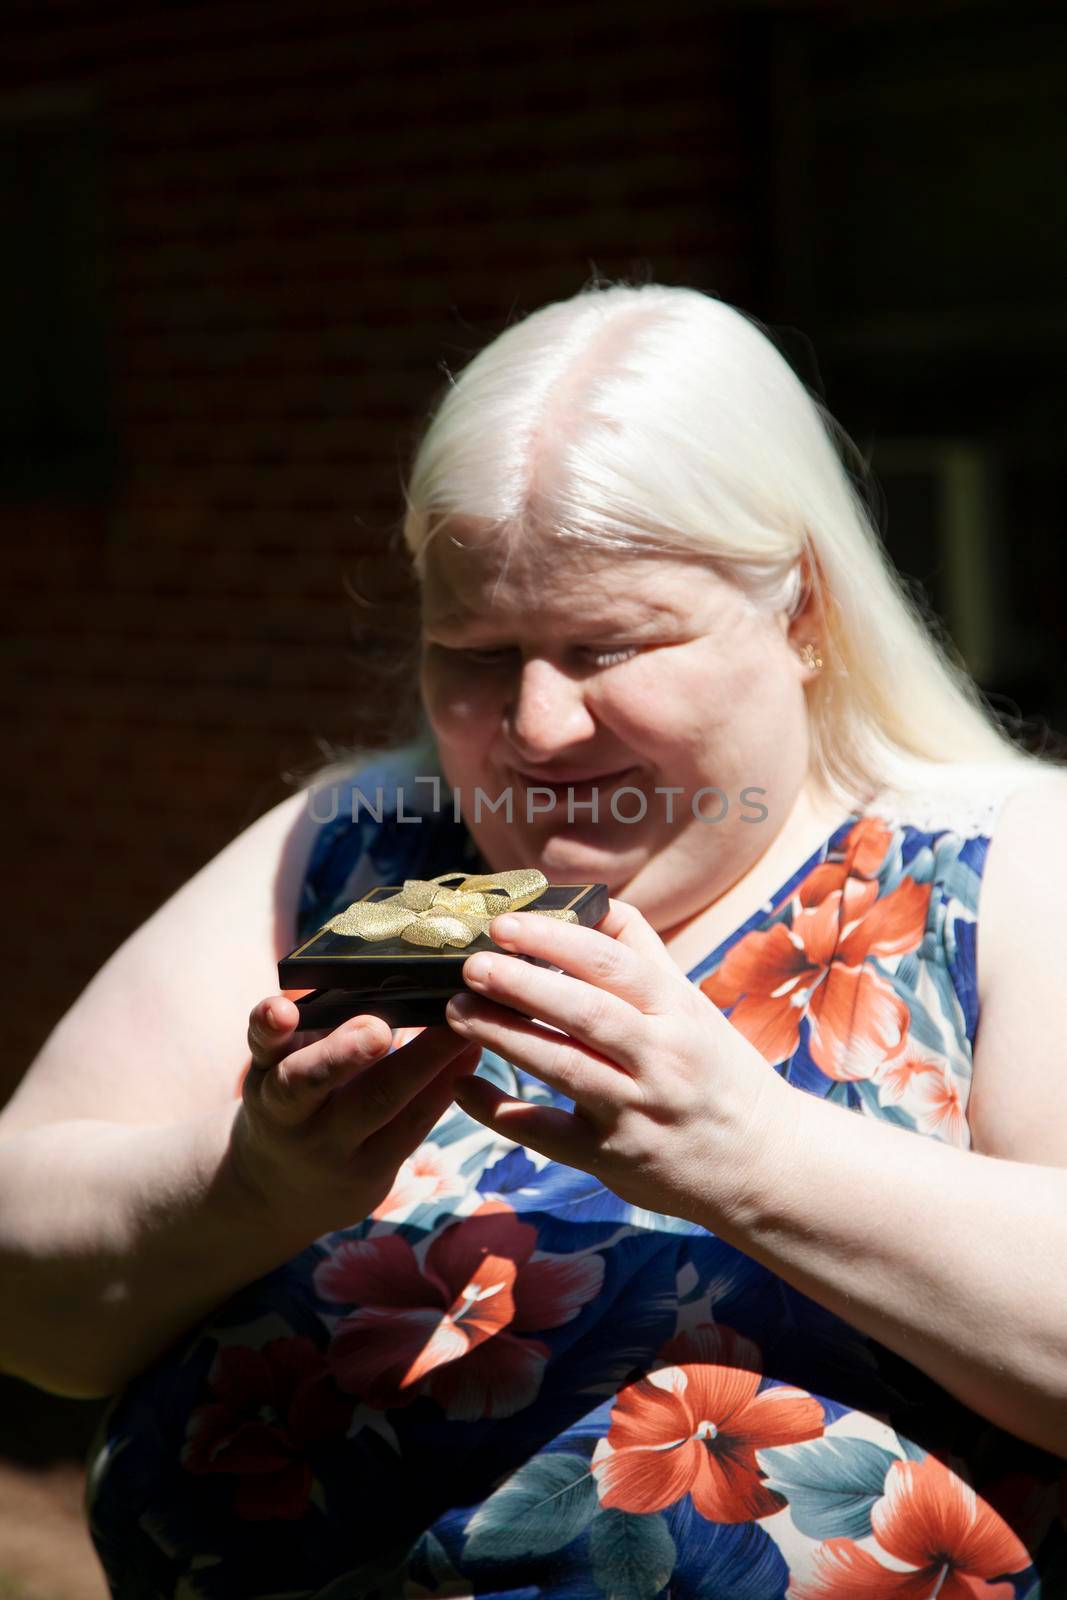 Albino woman opening a black gift box with a gift card in it